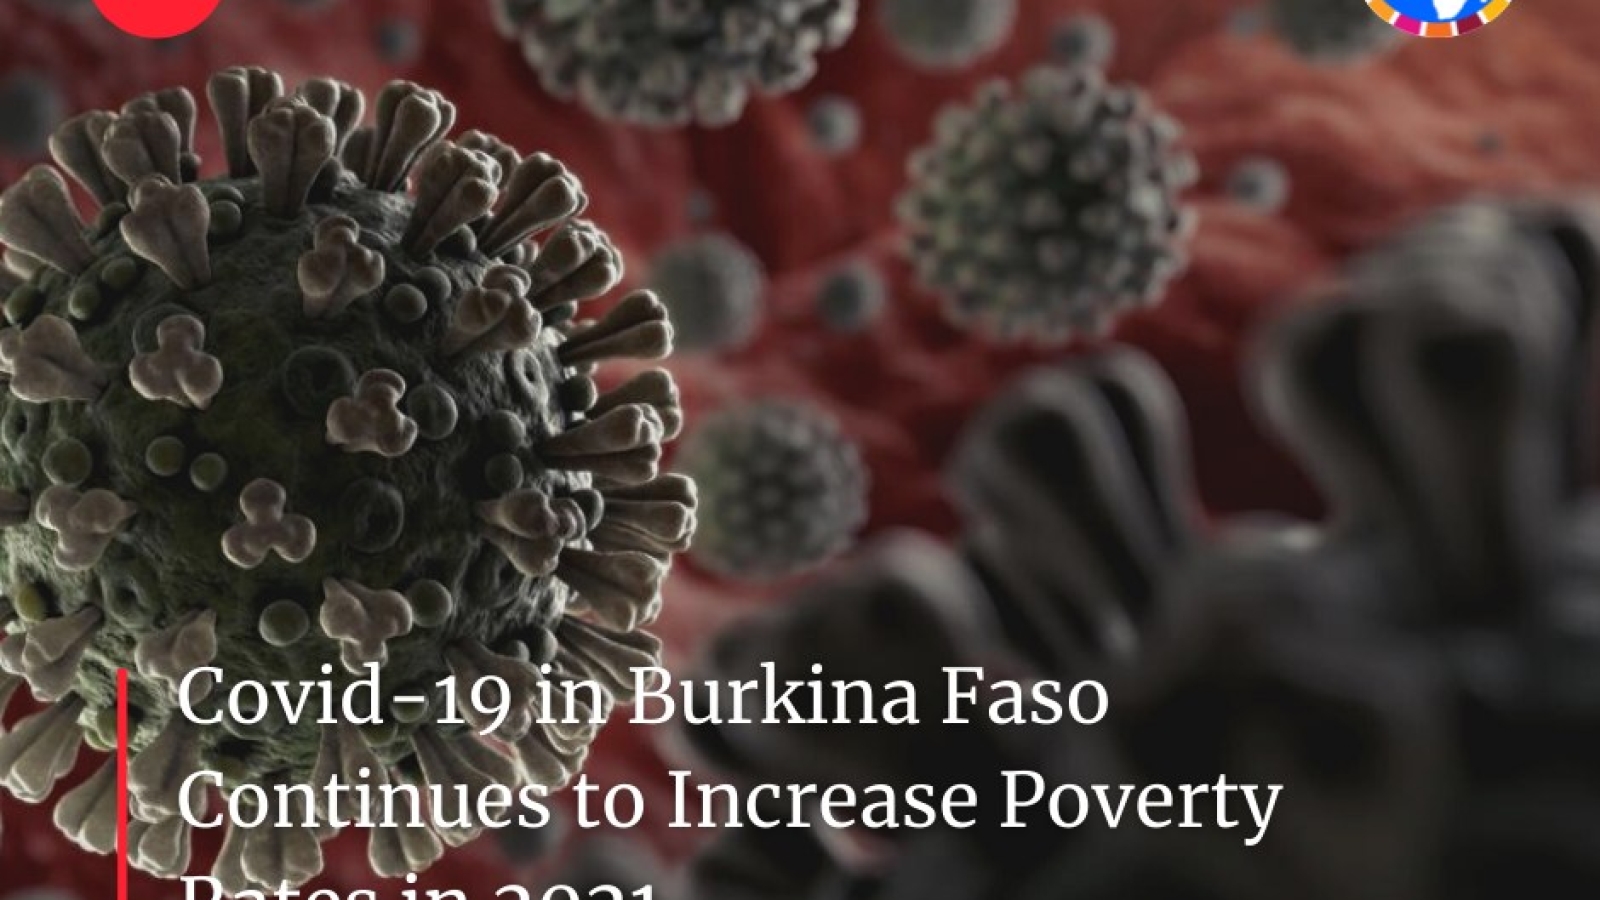 Covid-19 in Burkina Faso Continues to Increase Poverty Rates in 2021